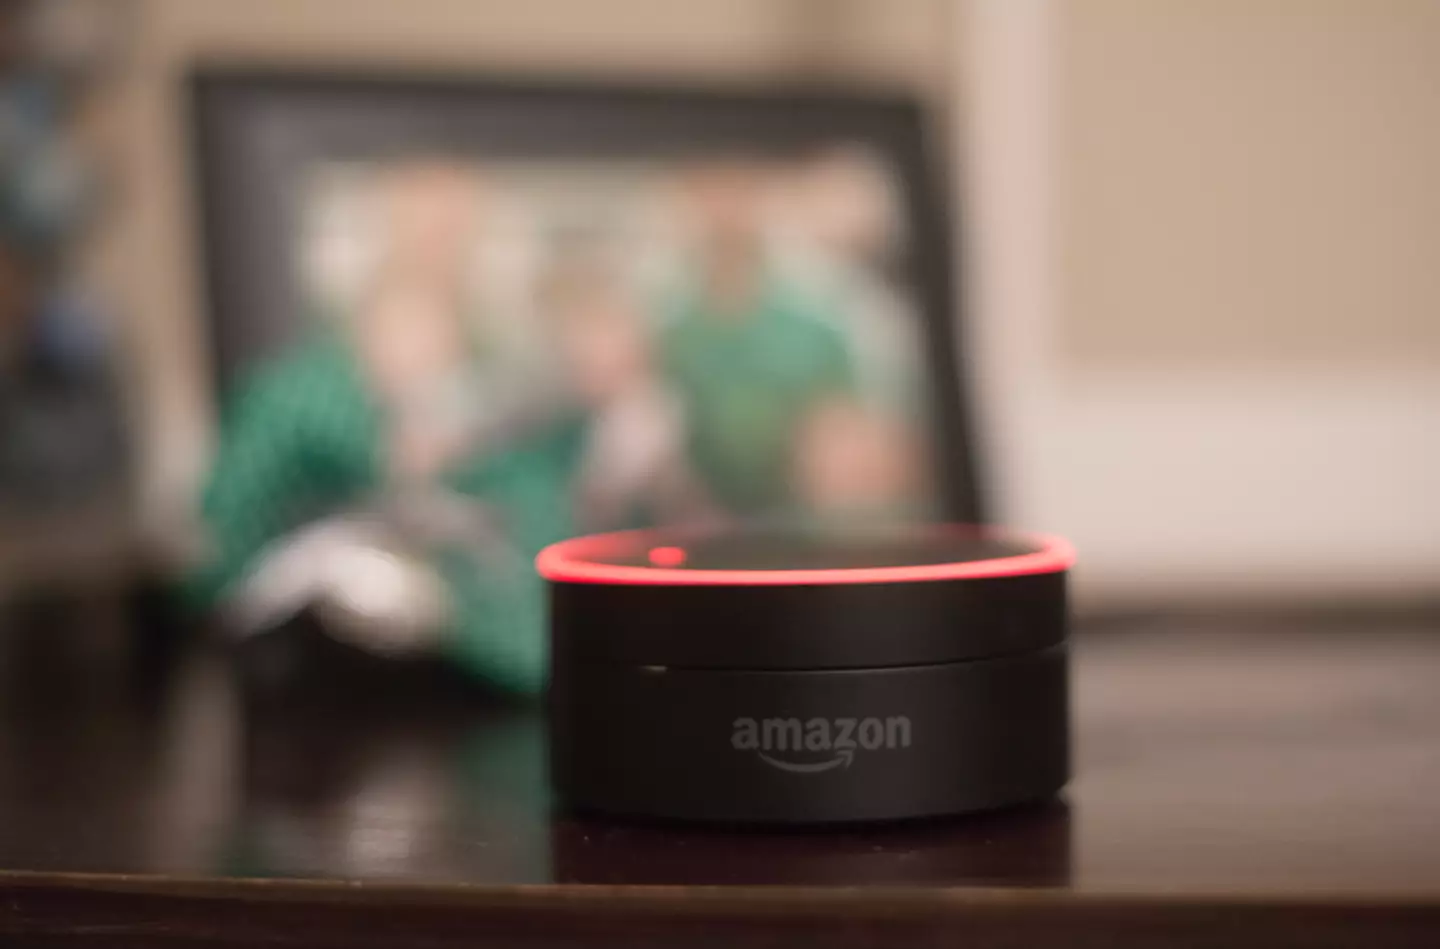 Alexa allows users to purchase Amazon products.